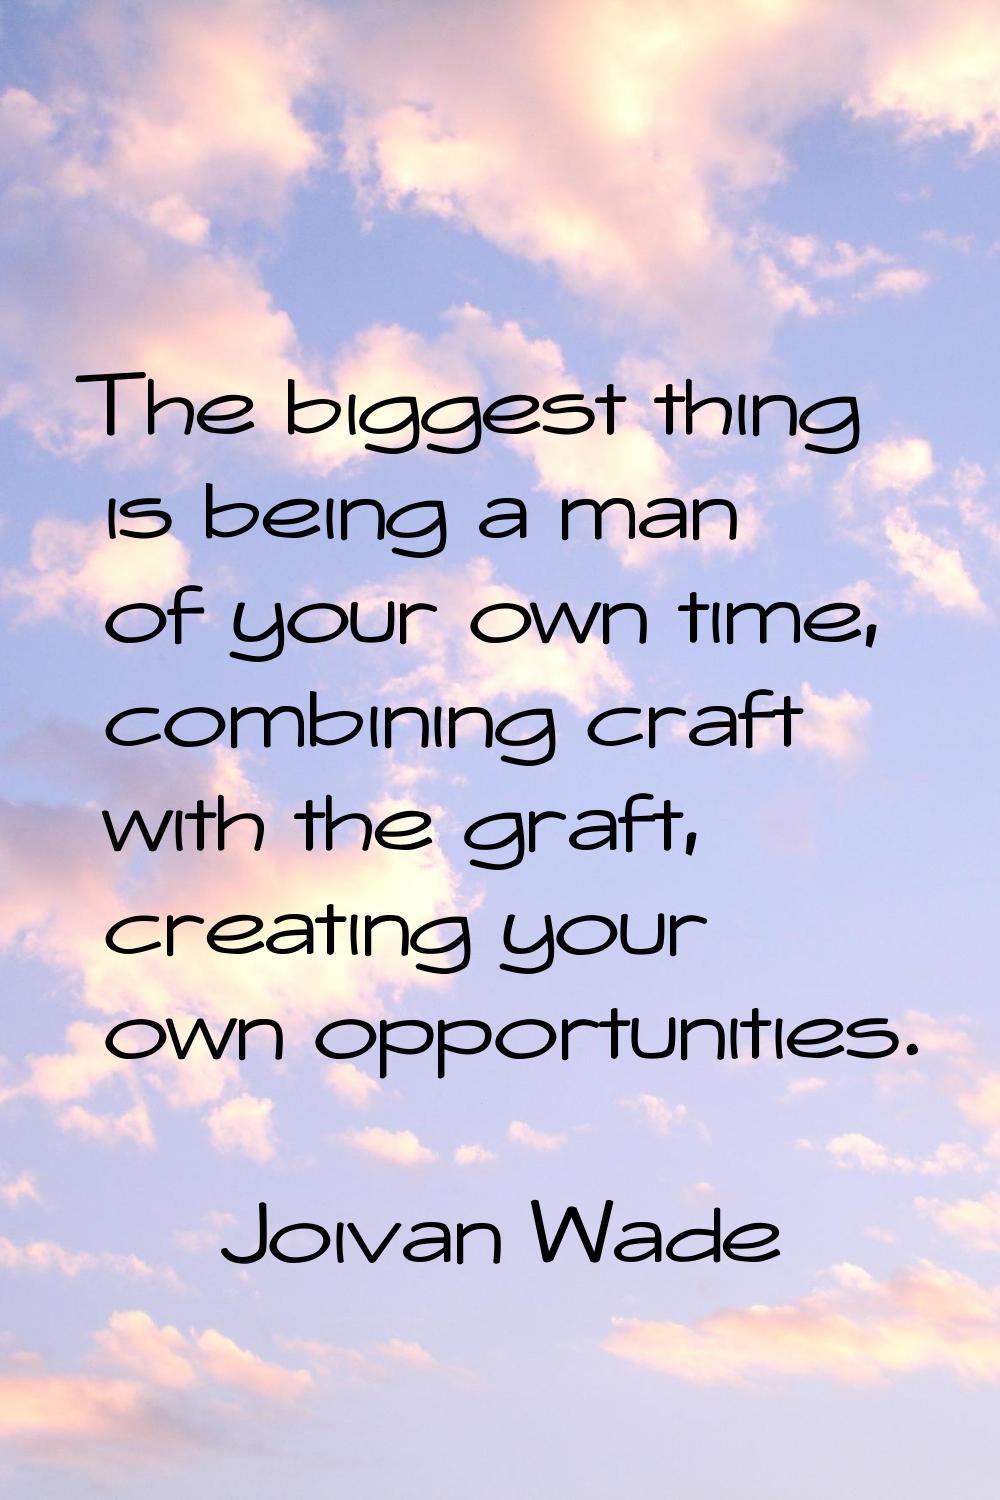 The biggest thing is being a man of your own time, combining craft with the graft, creating your ow